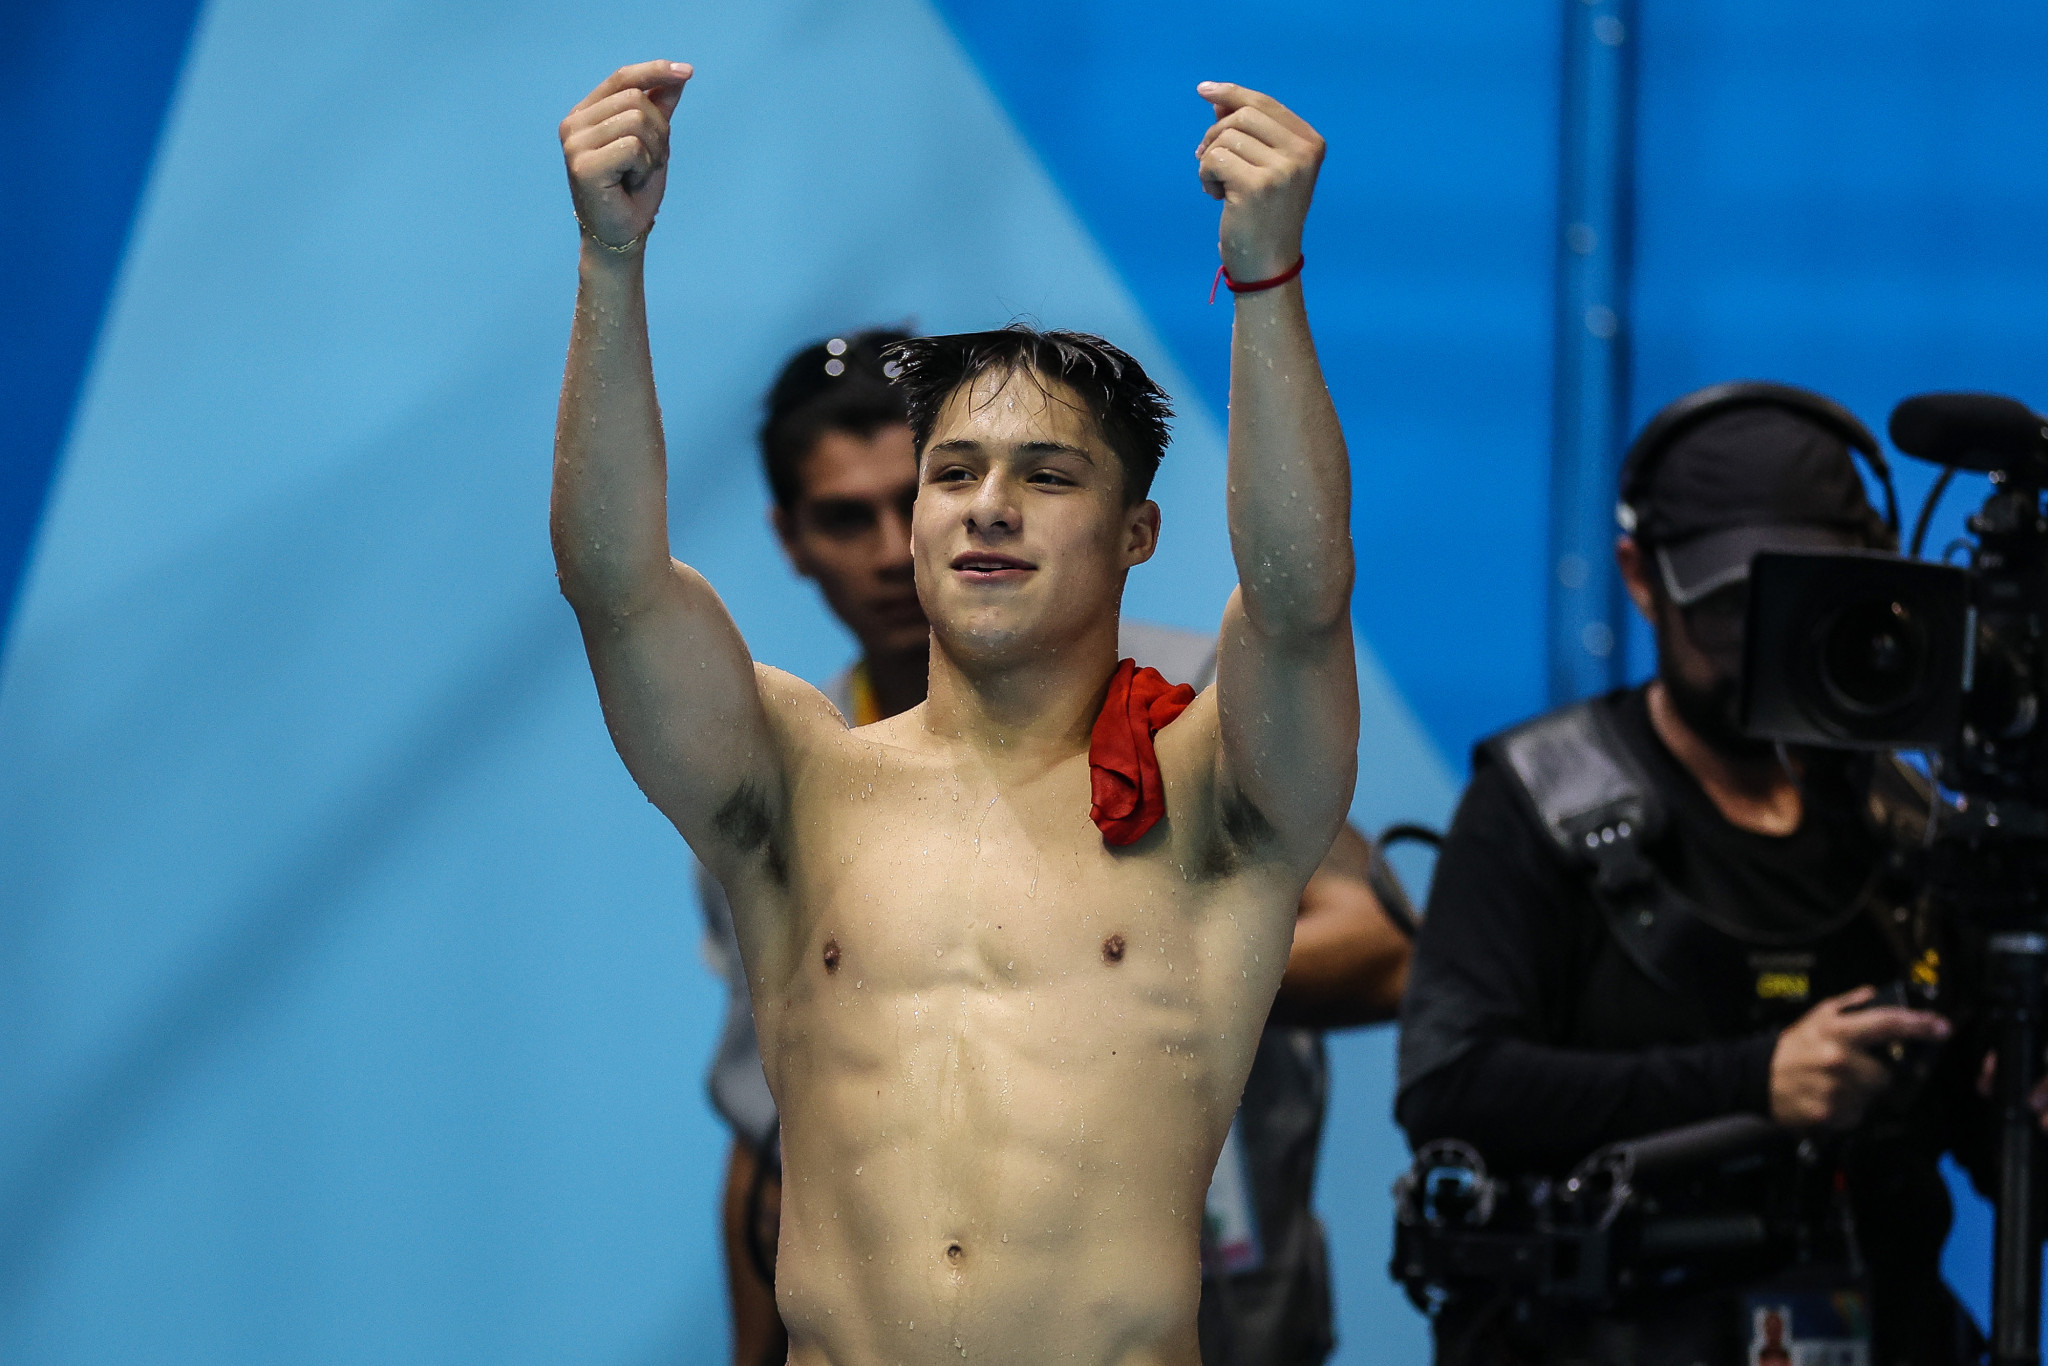 Osmar Olvera won his third diving gold of the Games for Mexico ©Getty Images